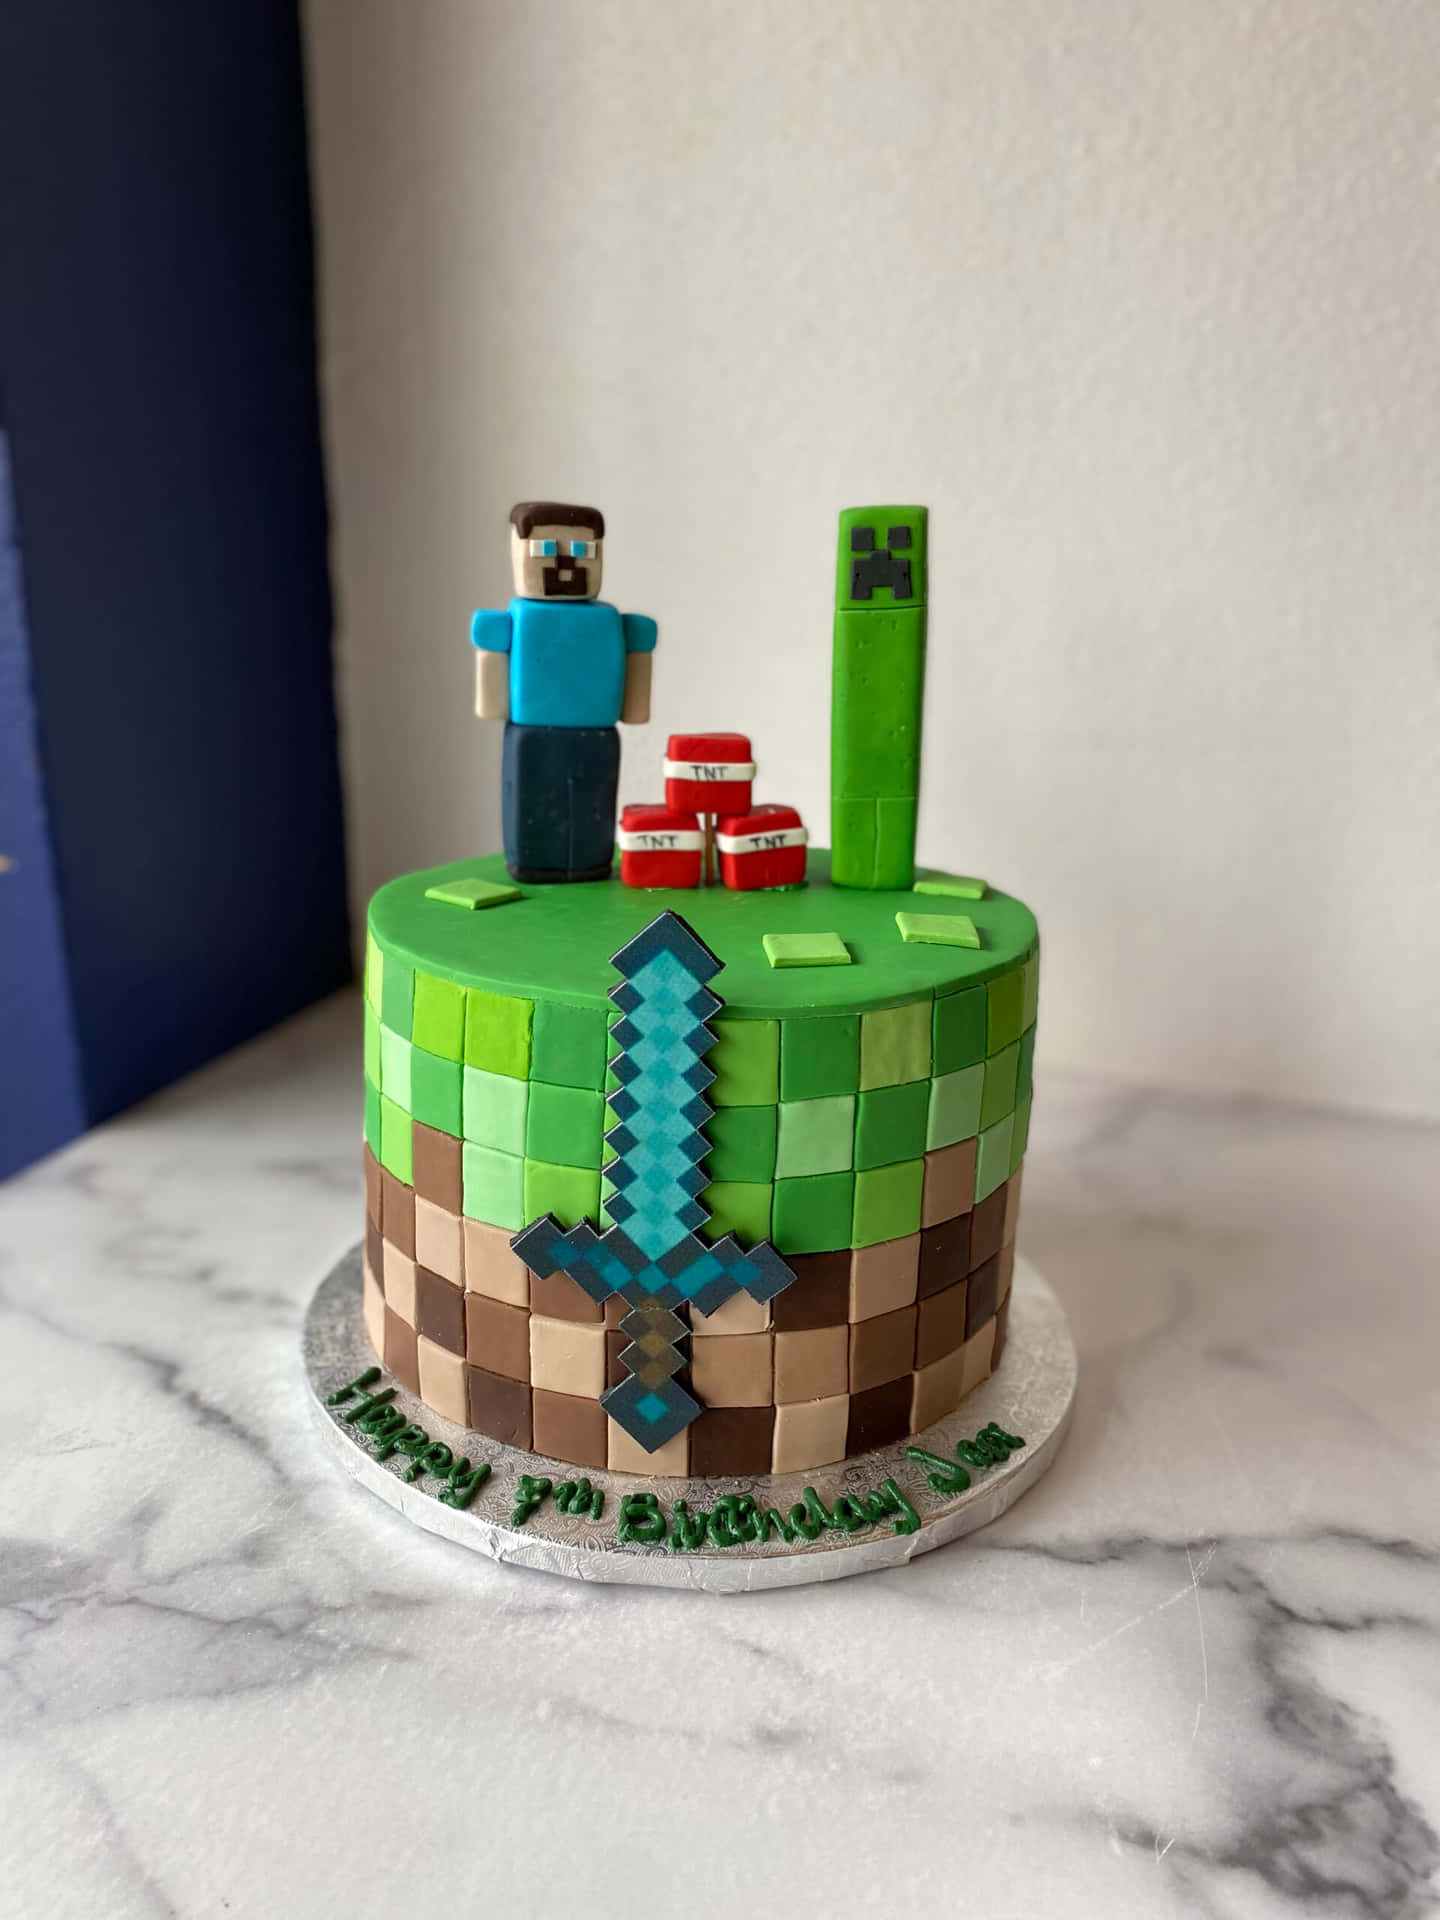 100+] Minecraft Cakes Pictures | Wallpapers.Com